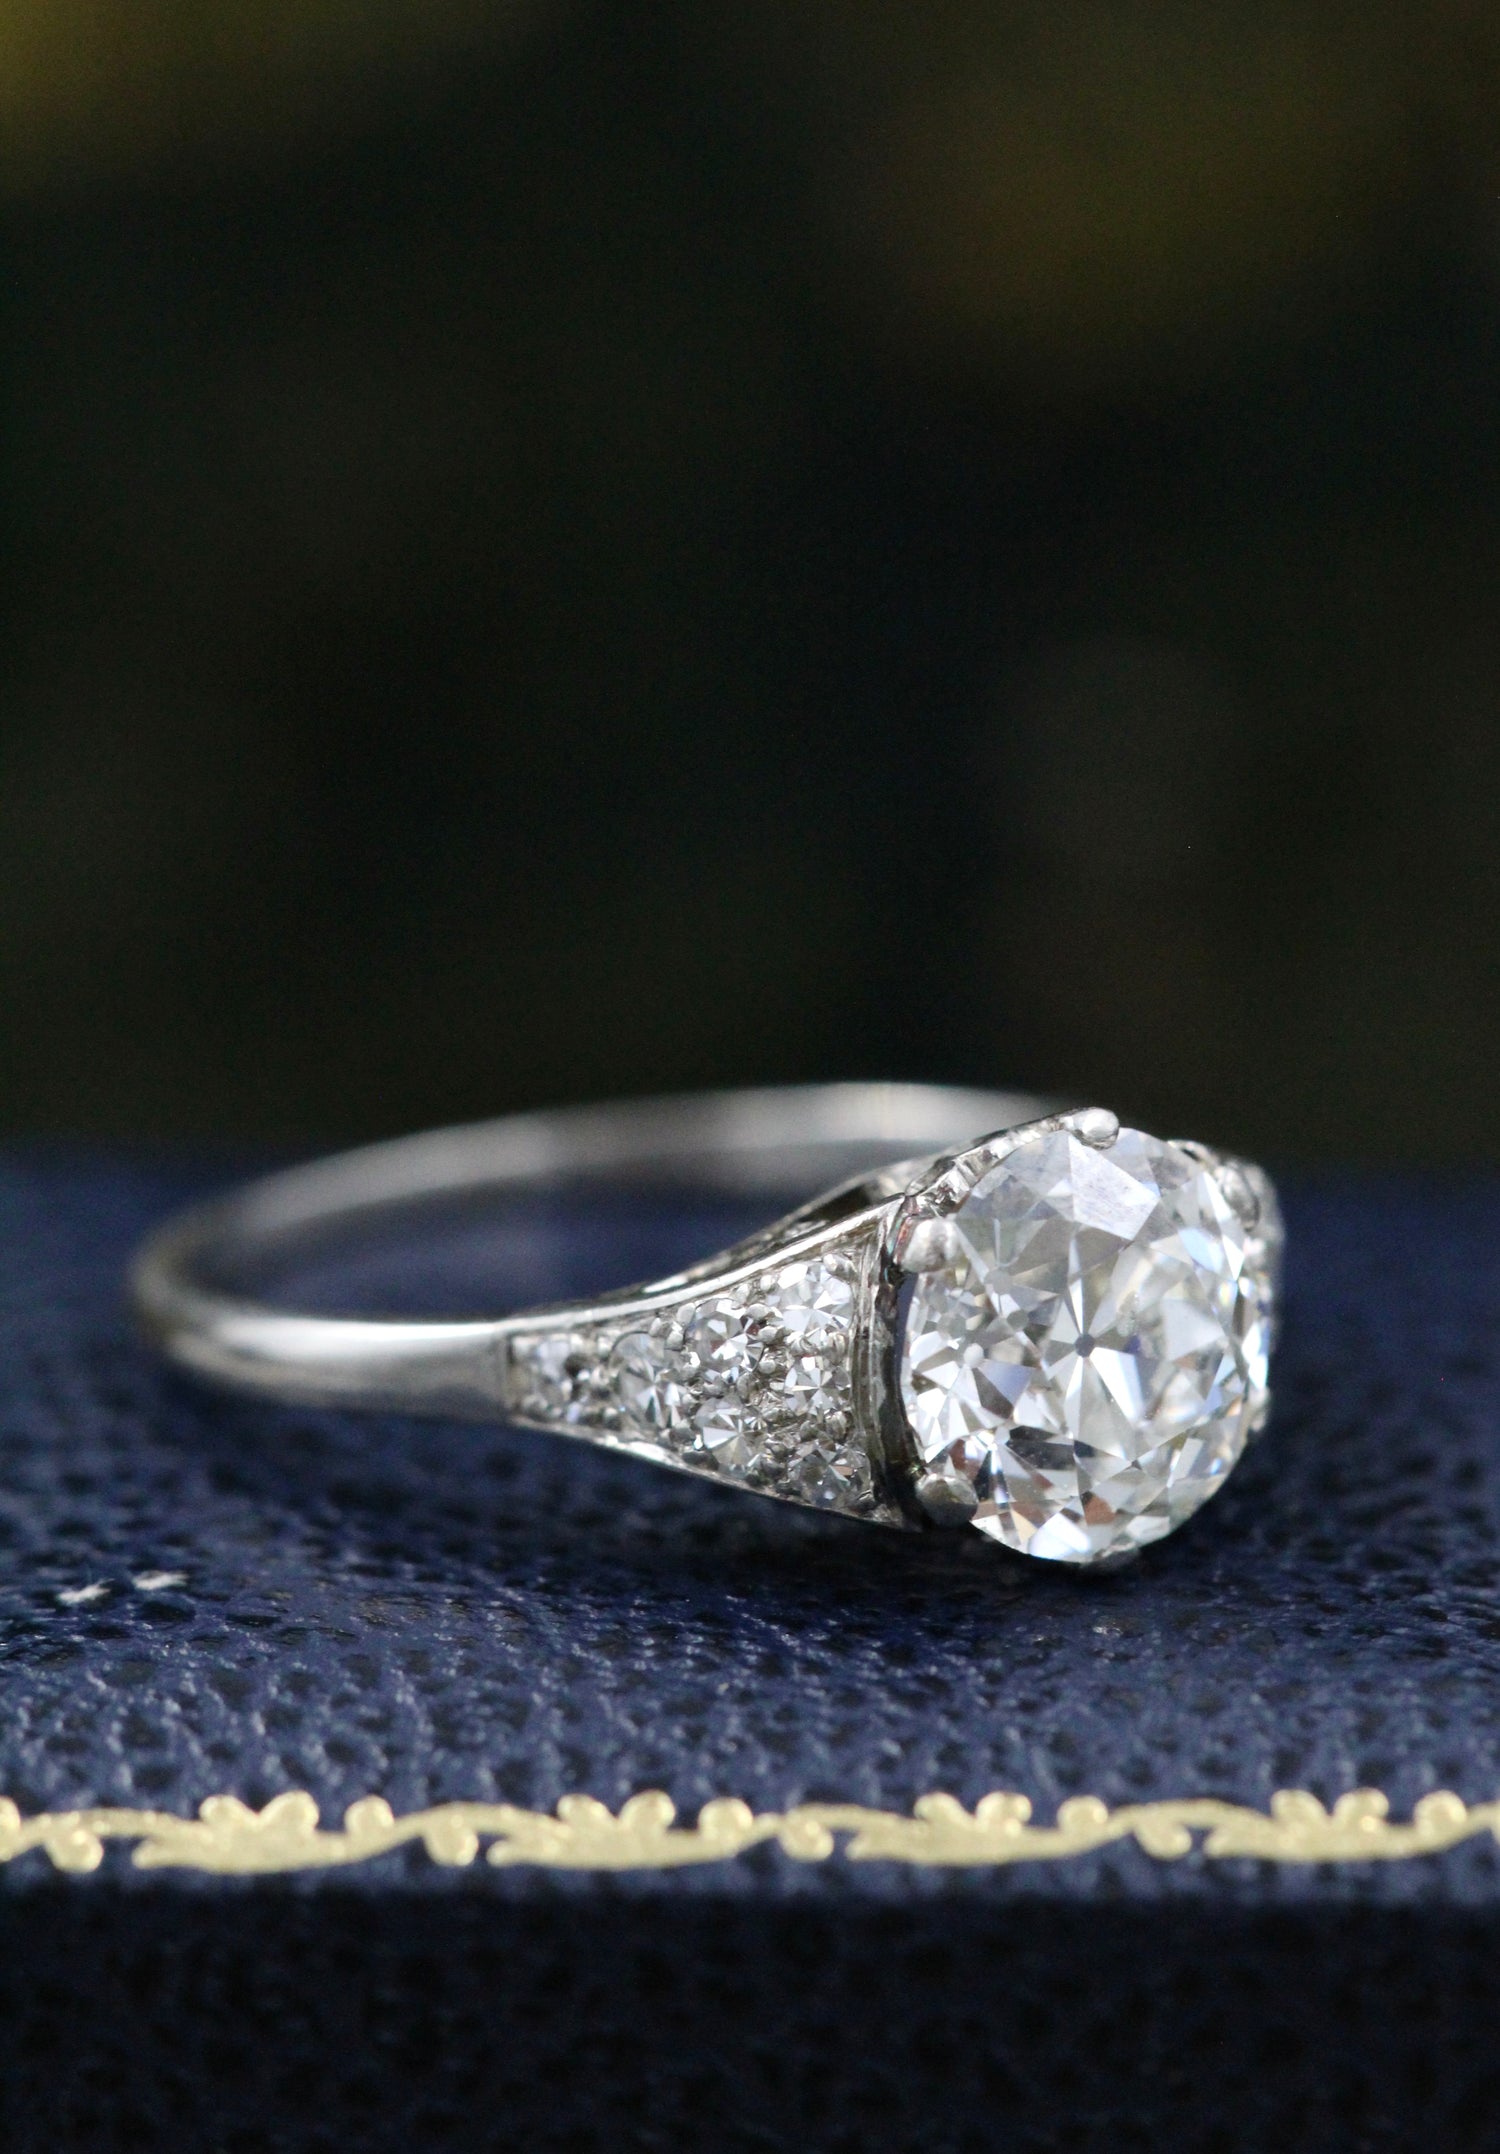 A very fine Platinum & Diamond Solitaire Ring, set with an Old European Cut Diamond, of 2.18 Carats, G Colour and SI1 Clarity. Offset by graduated Diamond Shoulders. Circa 1925 - Robin Haydock Antiques